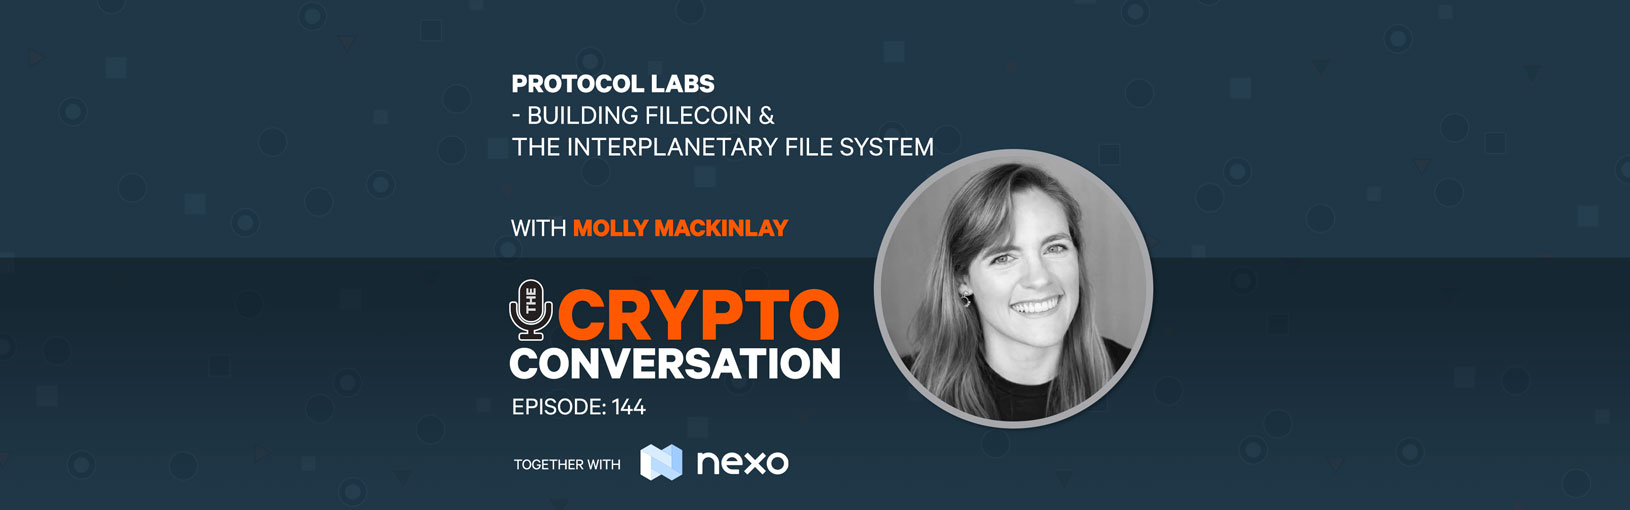 Protocol Labs – Building Filecoin & the InterPlanetary File System